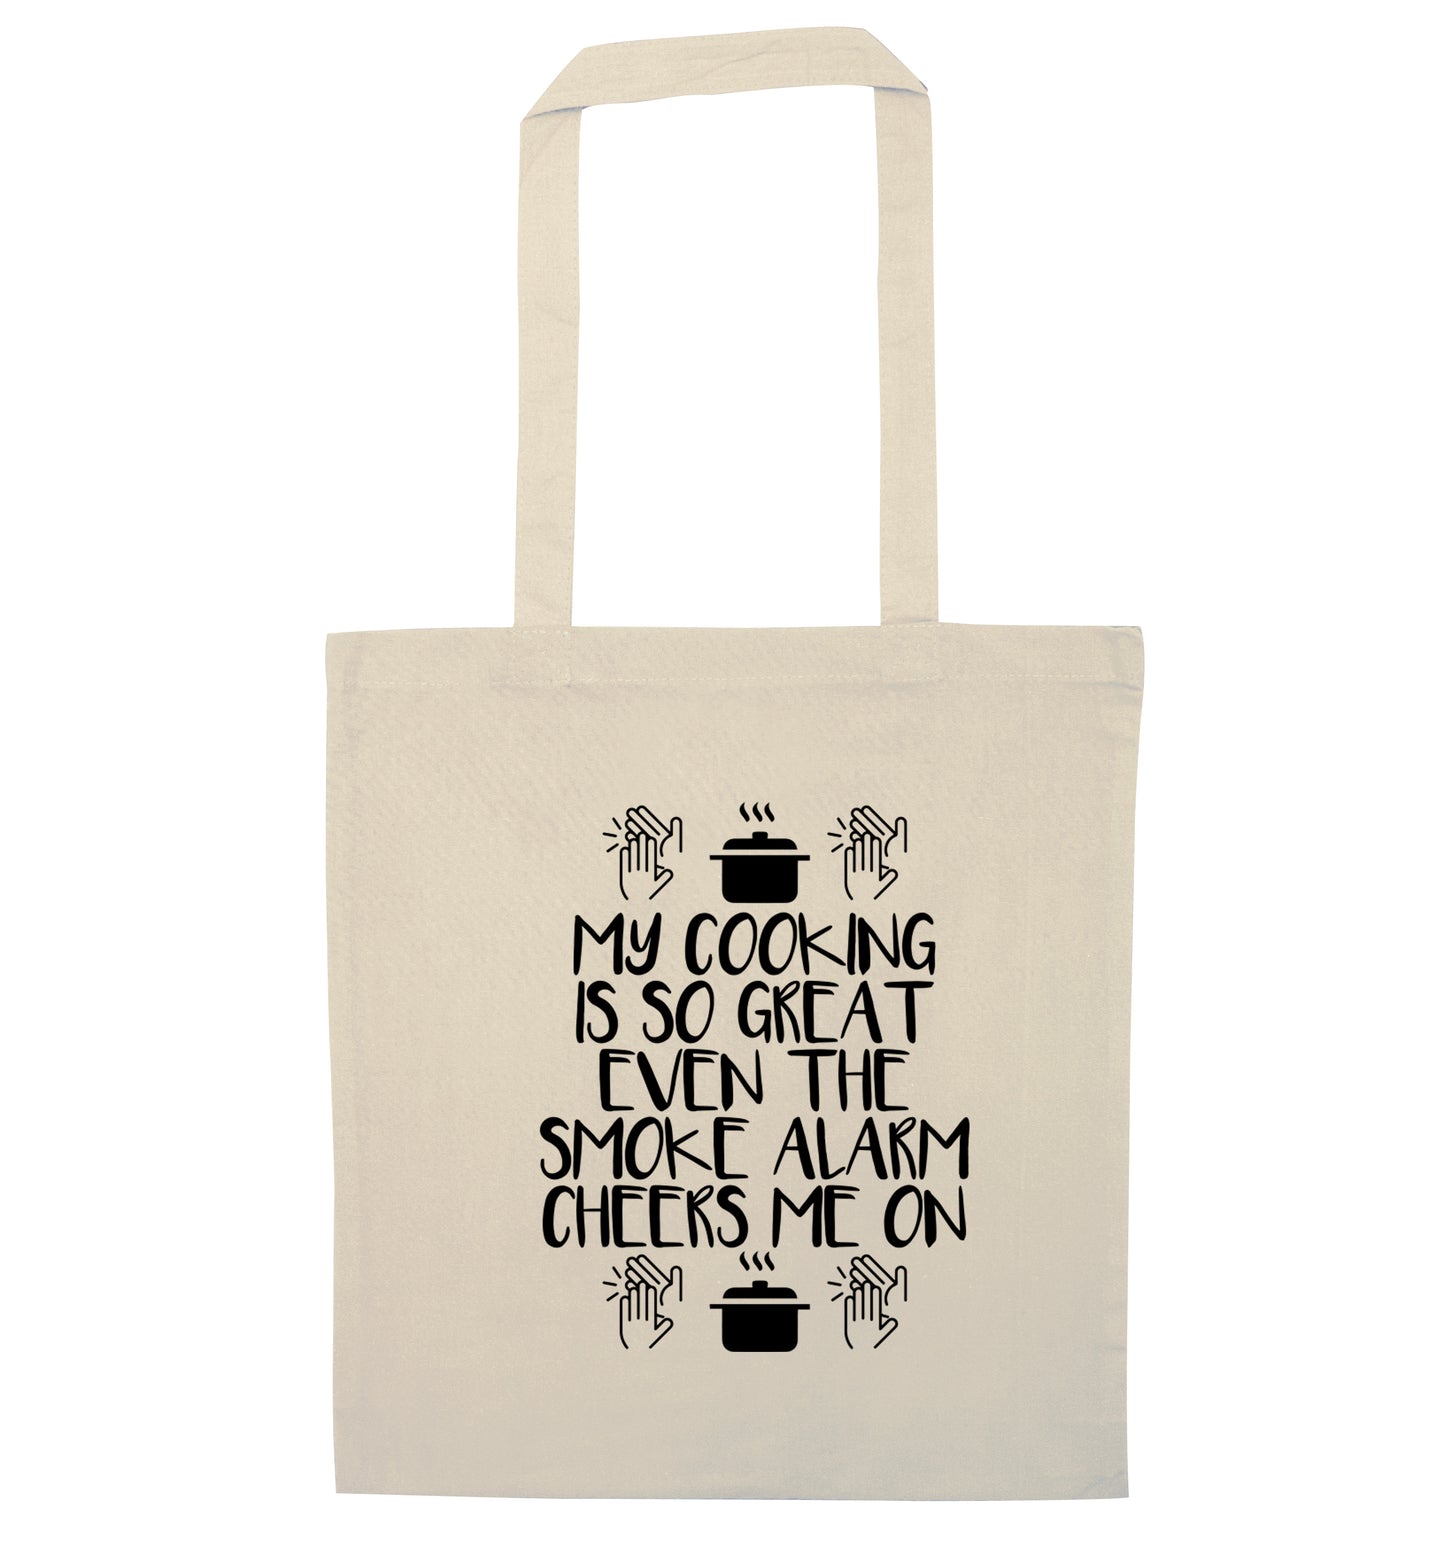 My cooking is so great even the smoke alarm cheers me on! natural tote bag